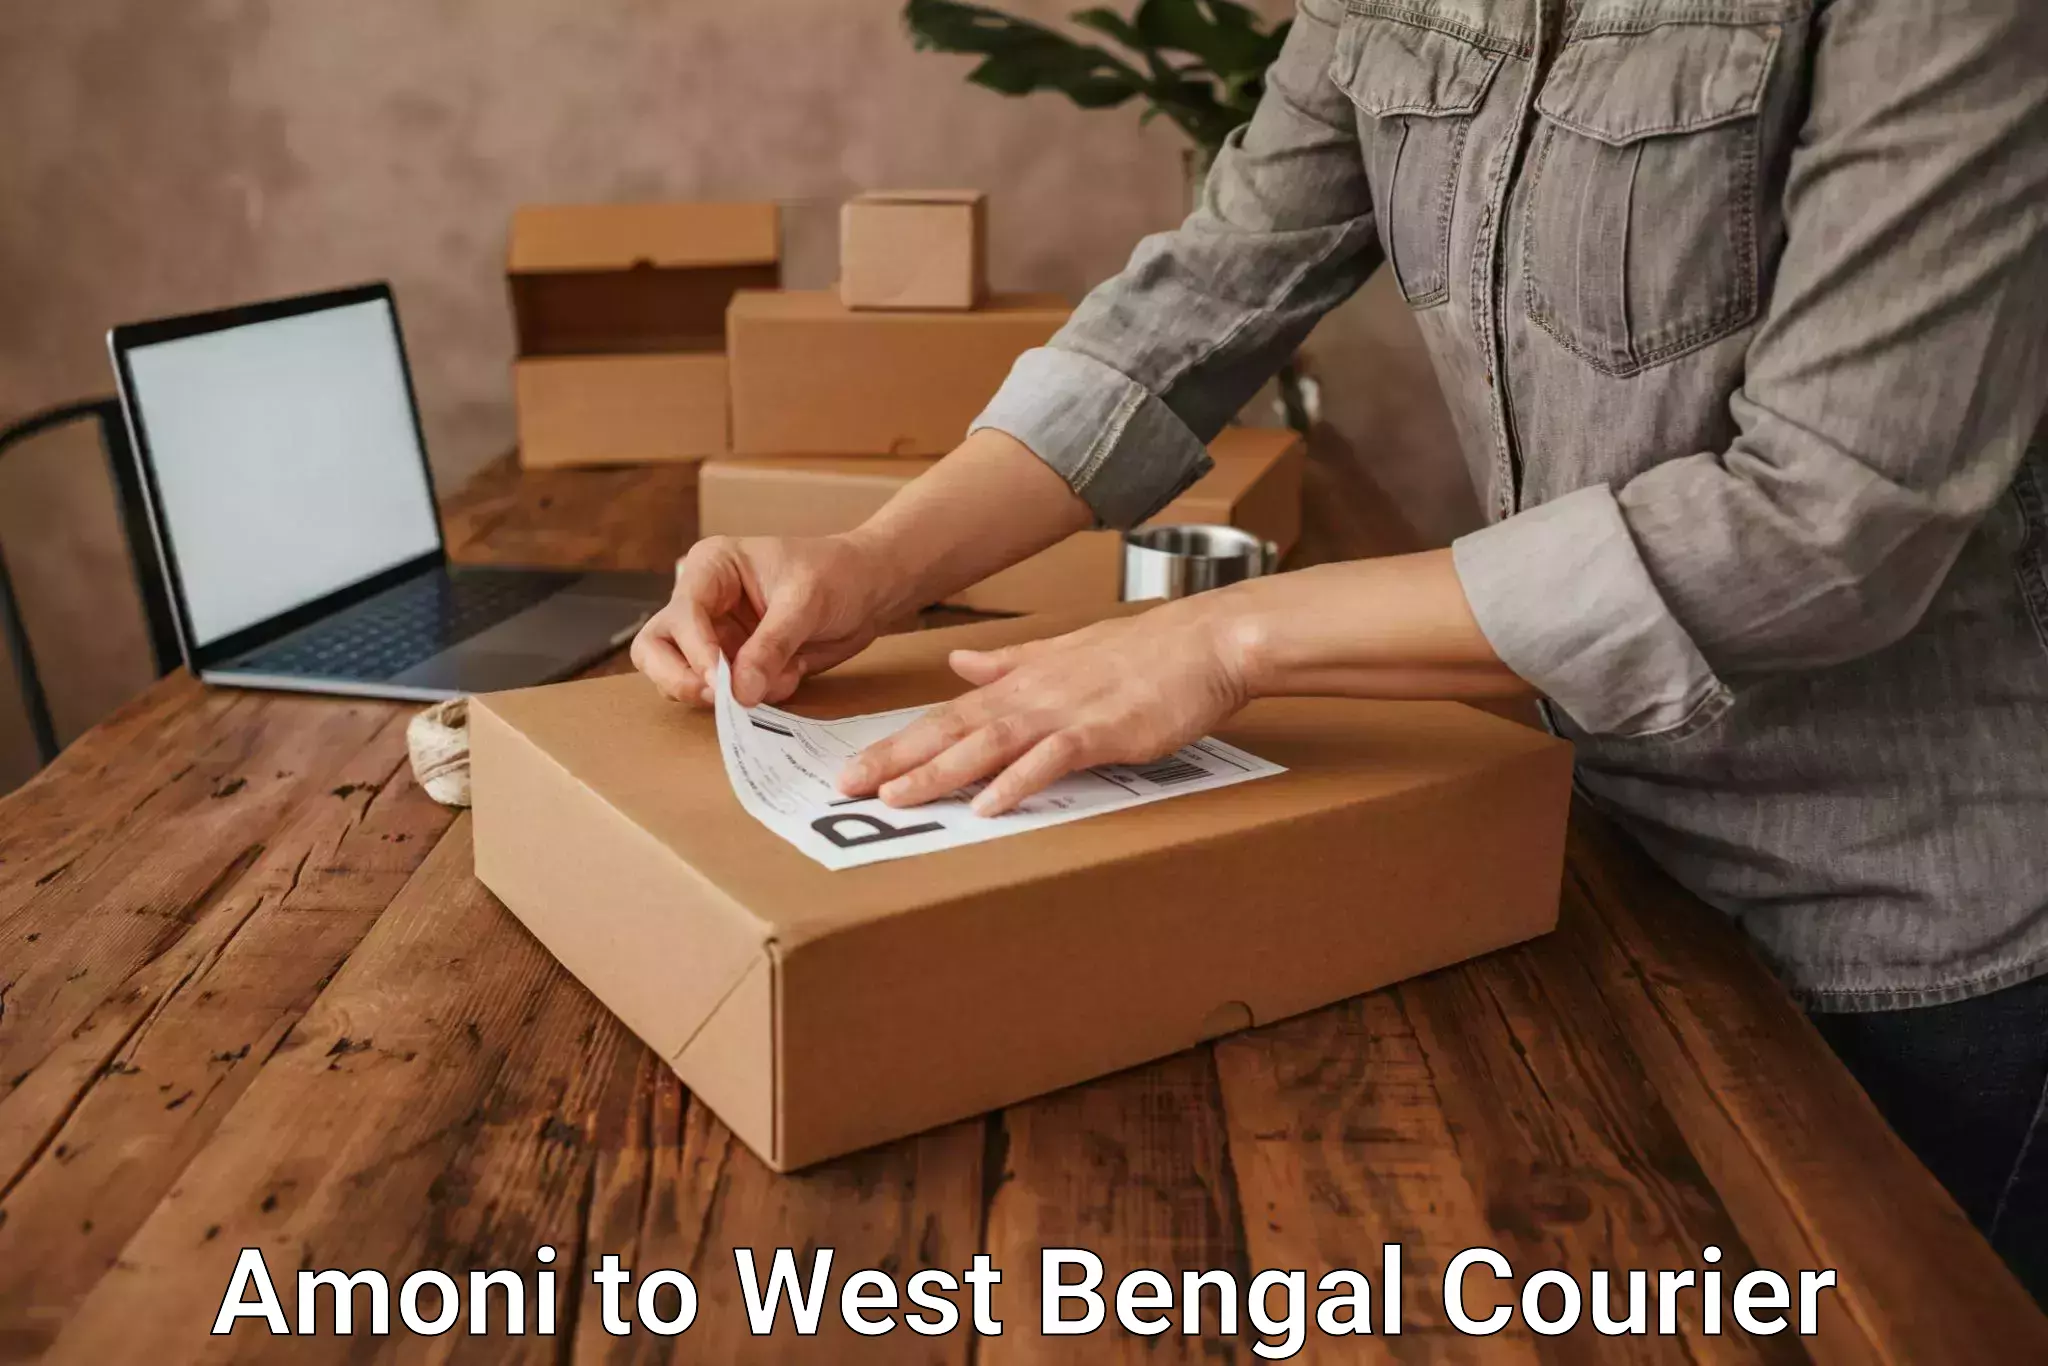 Professional courier handling Amoni to West Bengal